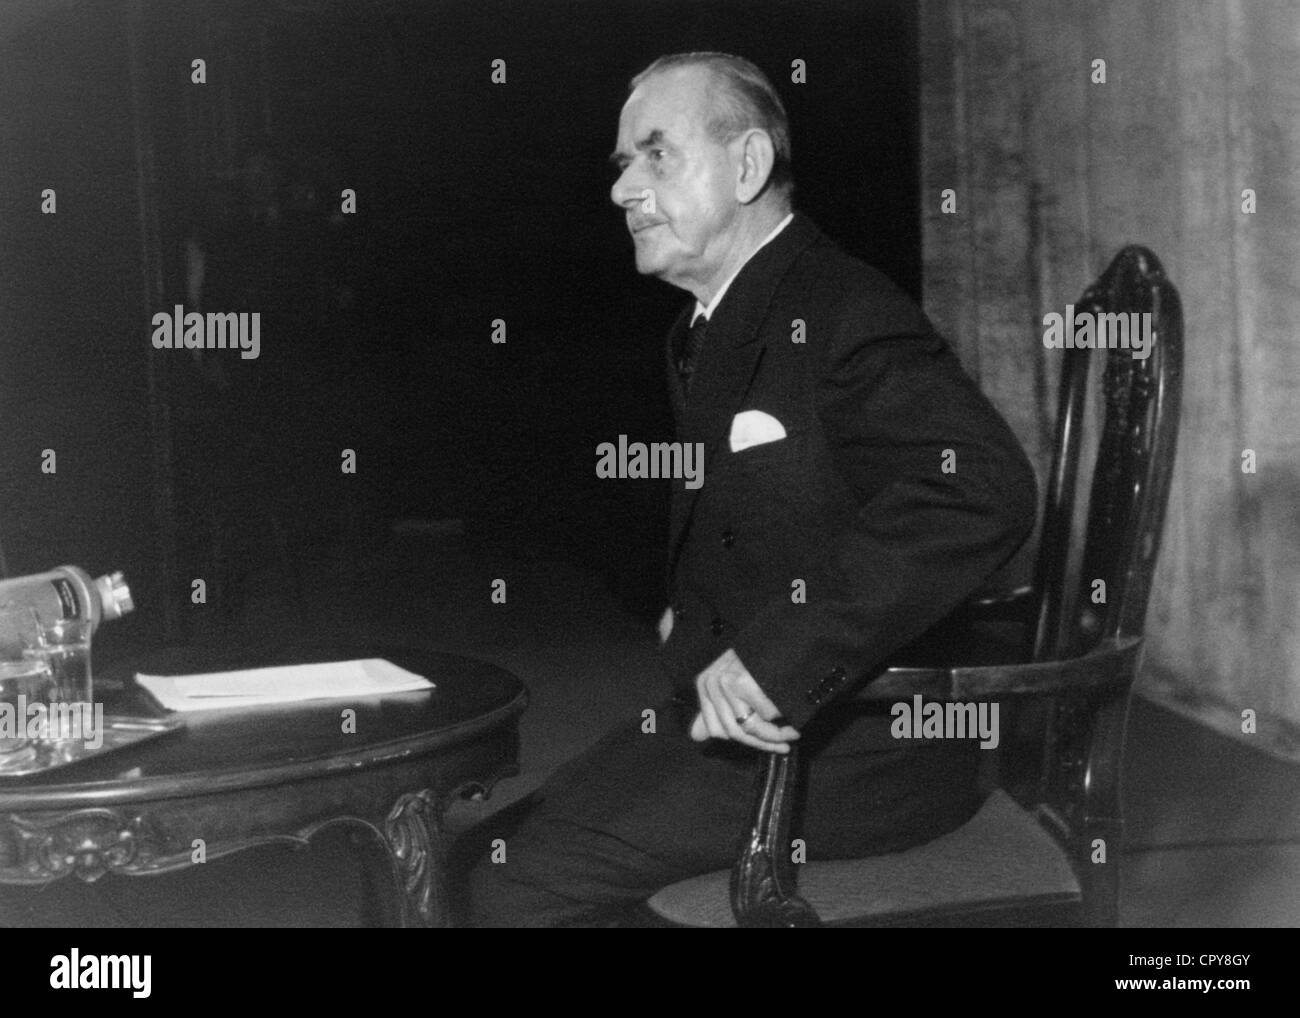 Mann, Thomas, 6.6.1875 - 12.8.1955, German author /writer, Nobel Prize for literature 1929, half length, during reading at Munich theater, 1930s, Stock Photo